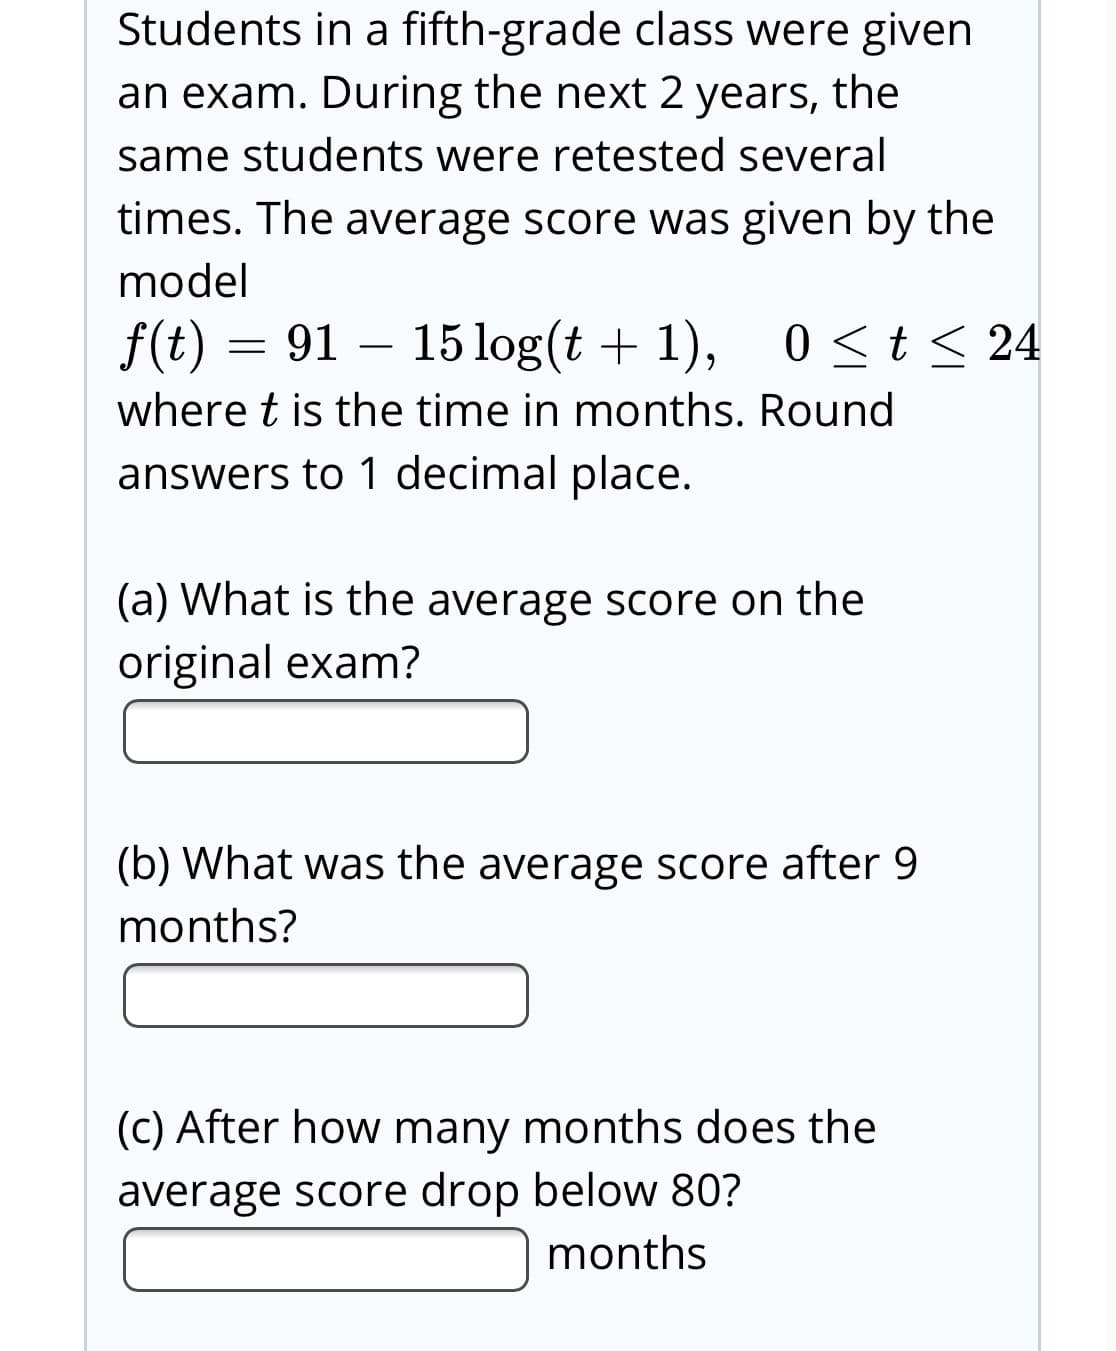 Students in a fifth-grade class were given
an exam. During the next 2 years, the
same students were retested several
times. The average score was given by the
model
f(t) = 91 – 15log(t + 1), 0 <t < 24
0くt< 24
where t is the time in months. Round
answers to 1 decimal place.
(a) What is the average score on the
original exam?
(b) What was the average score after 9
months?
(c) After how many months does the
average score drop below 80?
months
